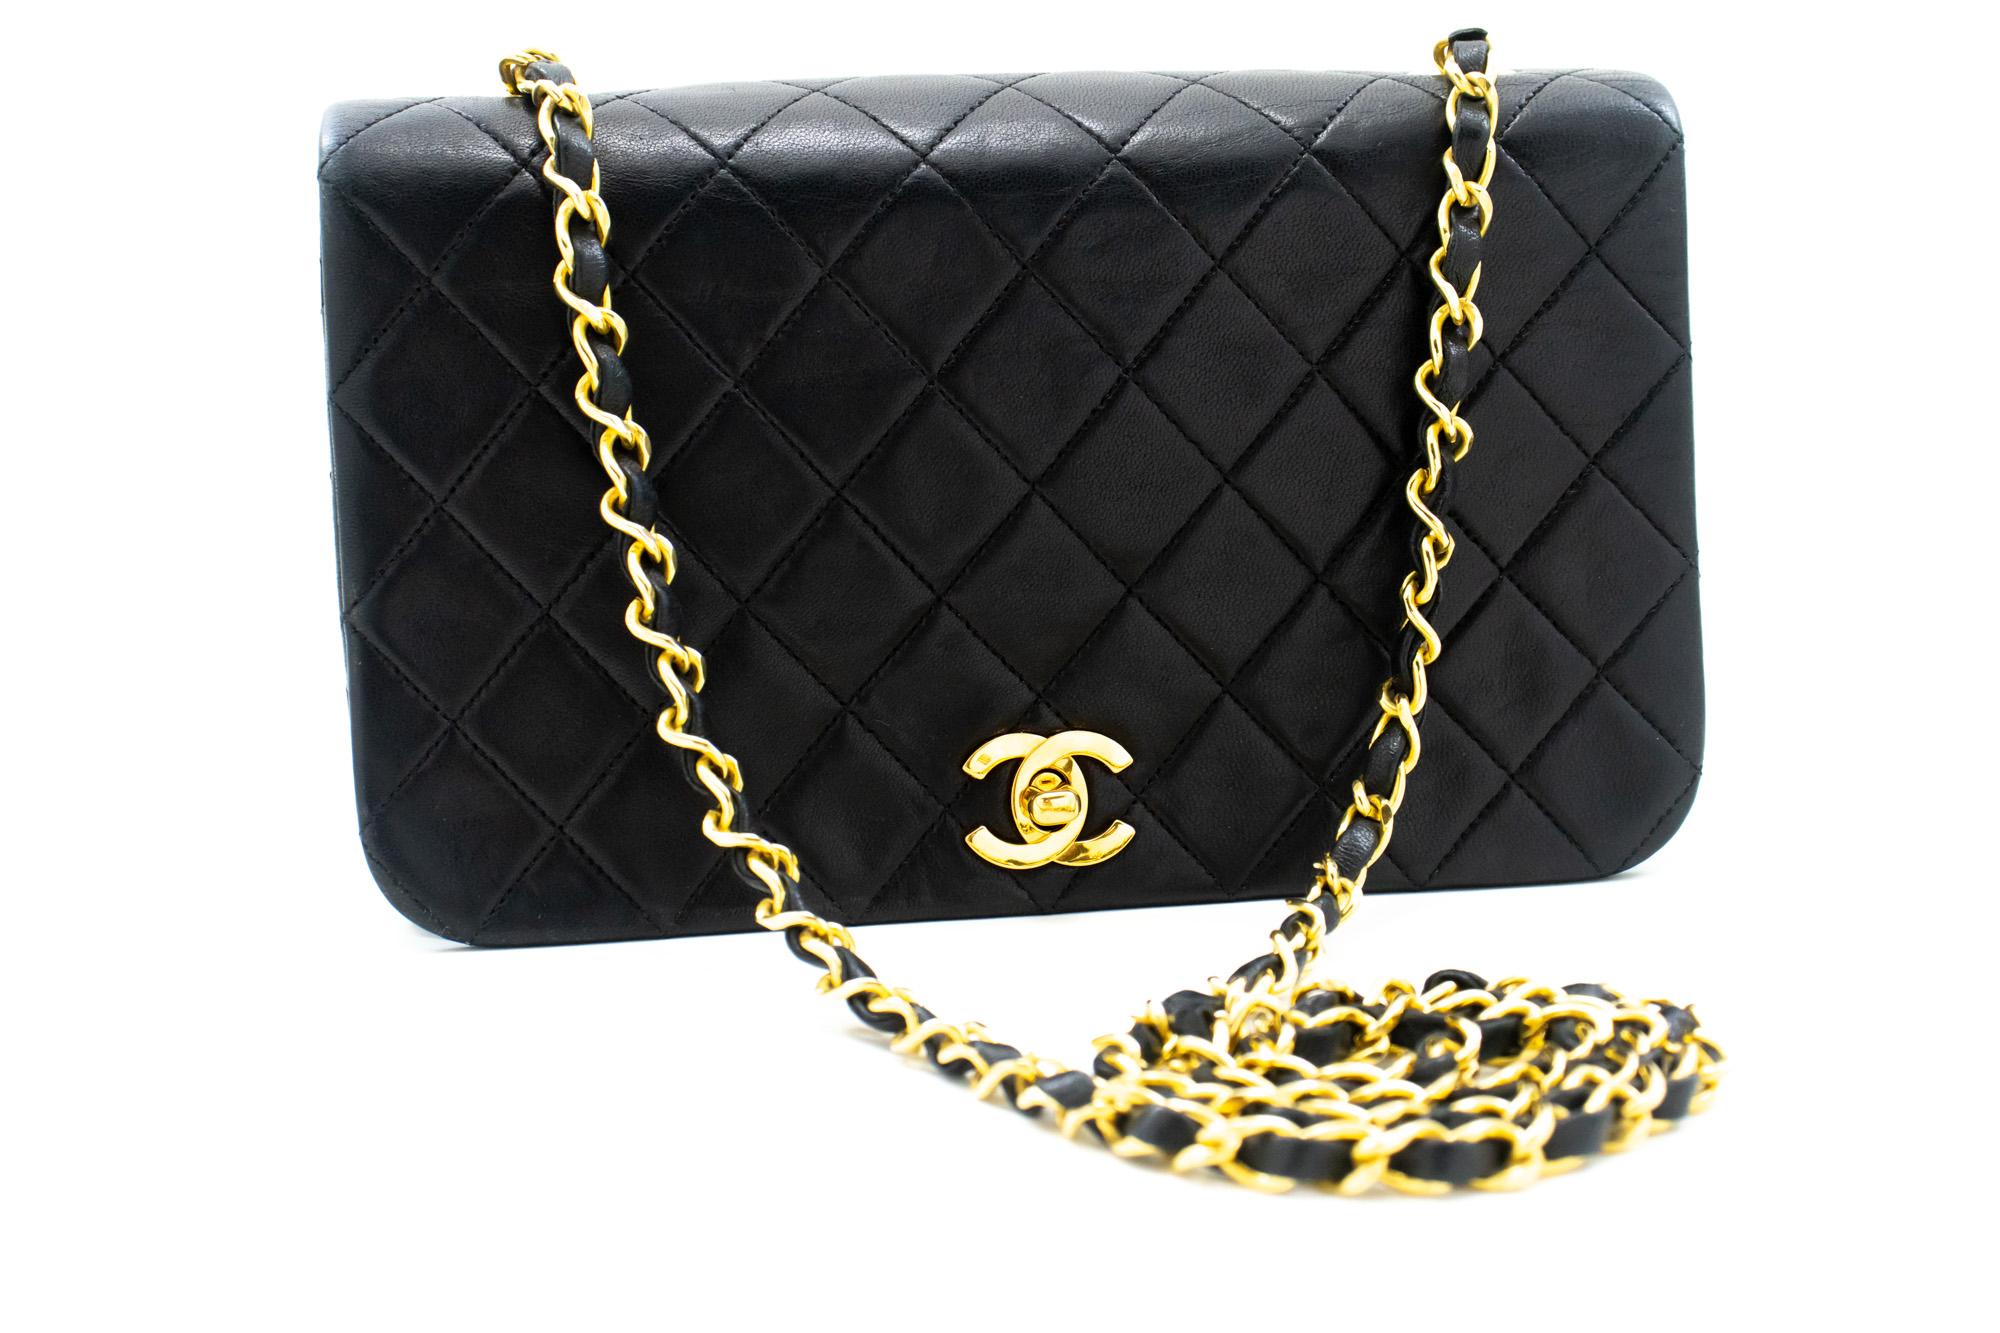 An authentic CHANEL Full Flap Chain Shoulder Bag Black Quilted made of black Lambskin. The color is Black. The outside material is Leather. The pattern is Solid. This item is Vintage / Classic. The year of manufacture would be 1989-1991.
Conditions